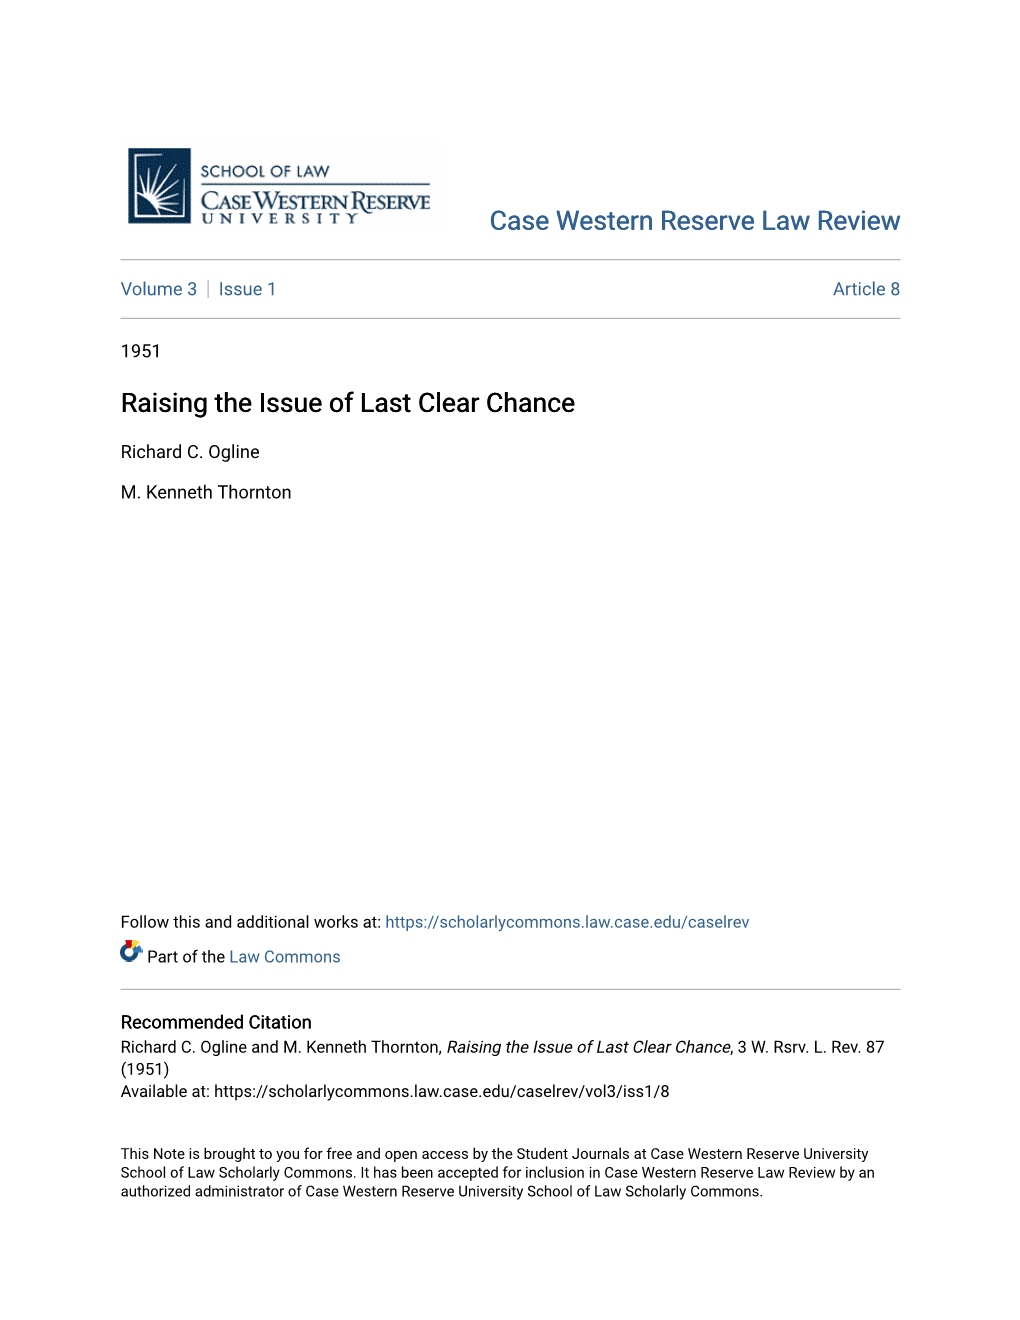 Raising the Issue of Last Clear Chance